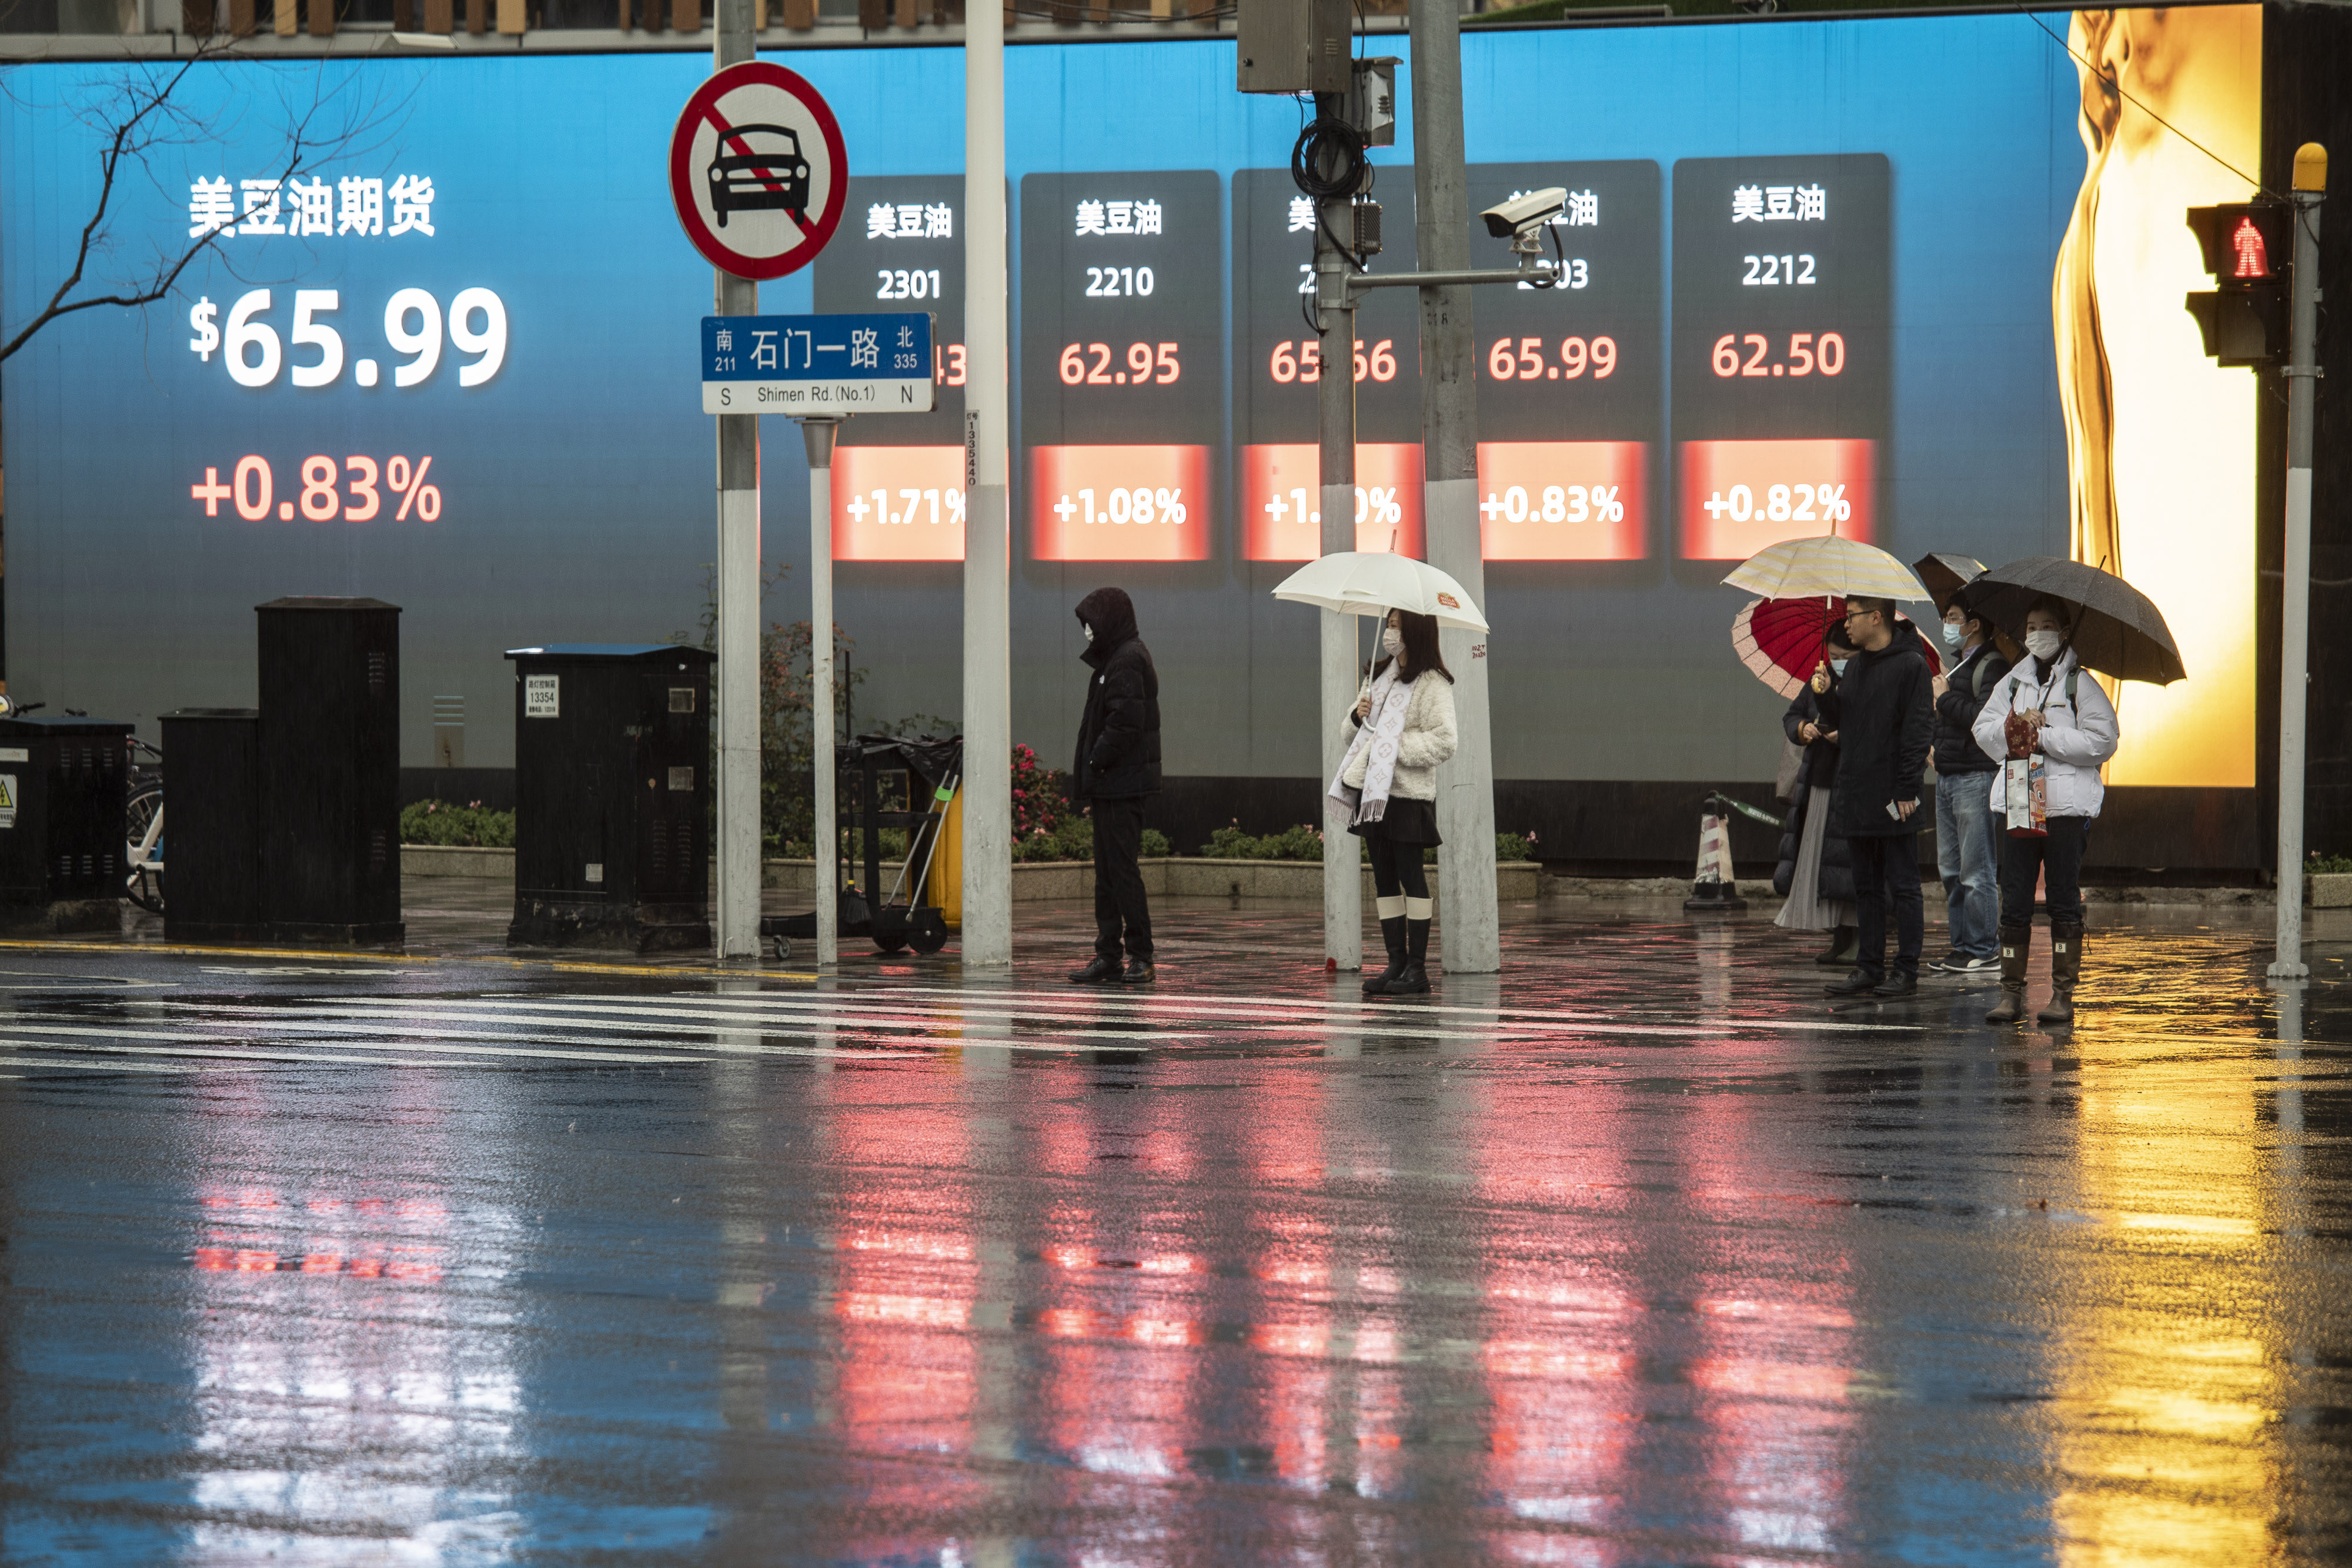 Pedestrians wait to cross a road in front of a public screen displaying commodity prices in Shanghai, on February 7. Photo: Bloomberg